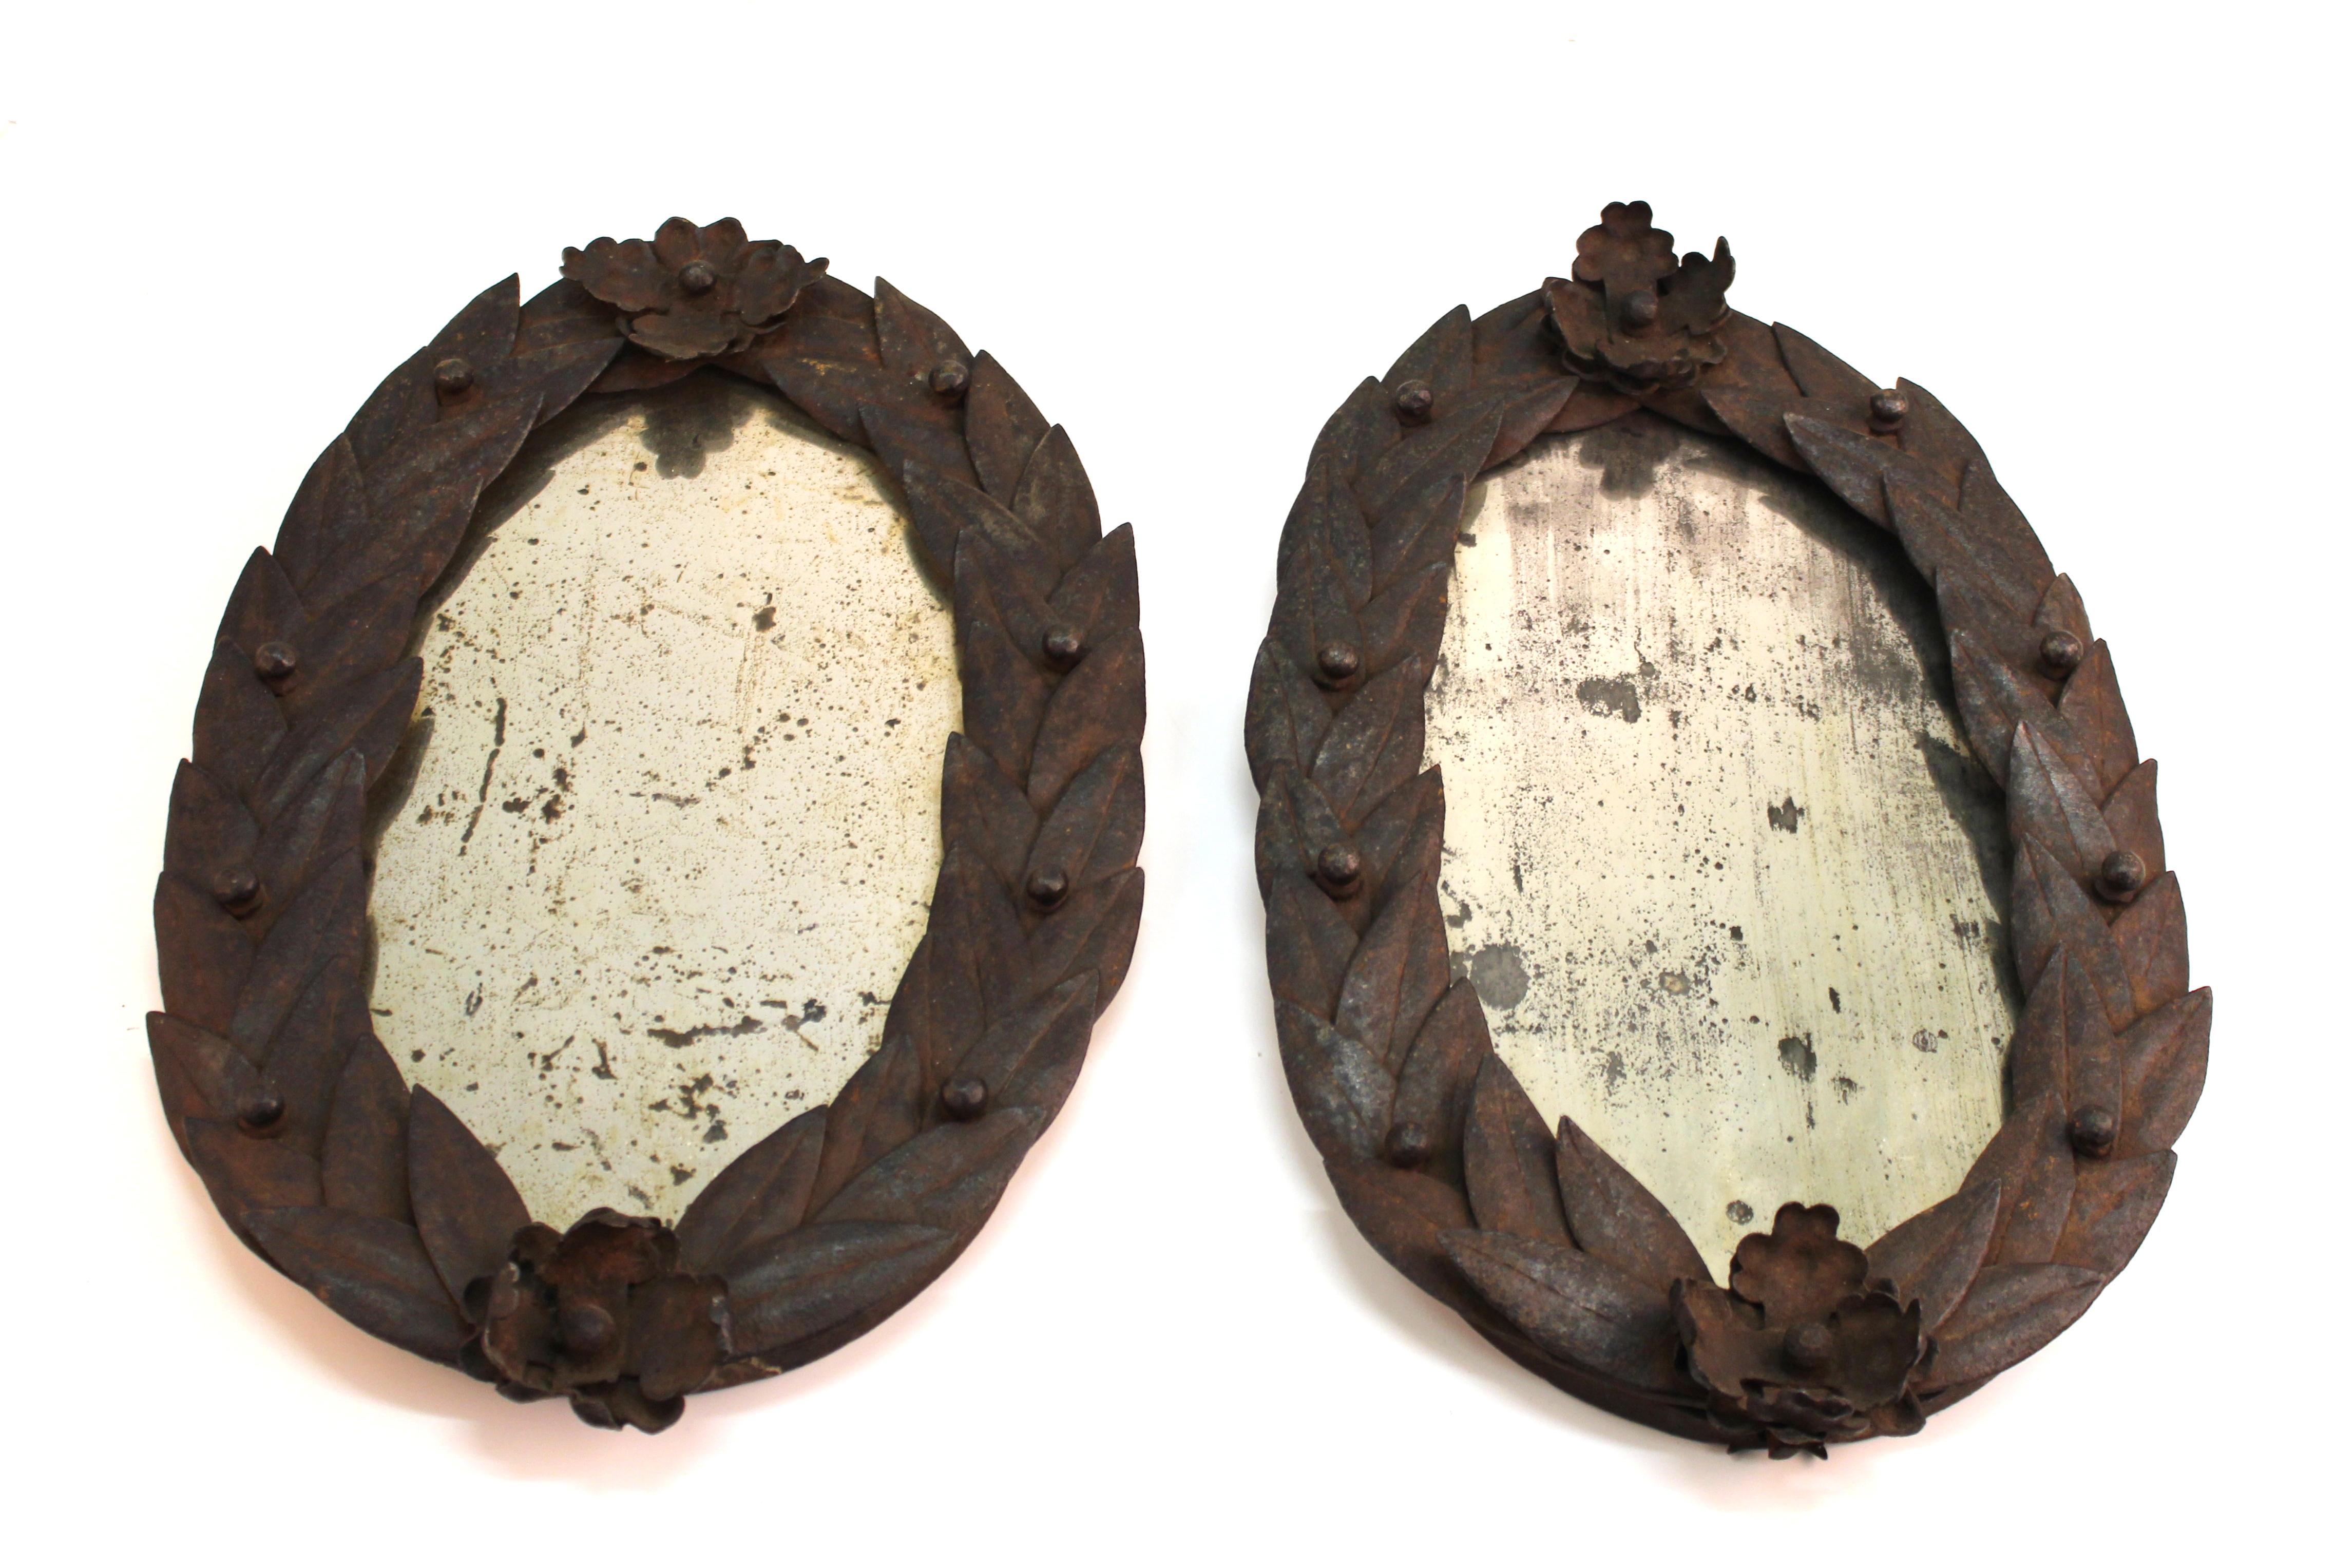 French neoclassical pair of oval mirrors with wrought iron borders in form of laurel leaf crowns. The pair was made in France during the 18th century and is in great antique condition with age-appropriate wear and desirable patina to the iron